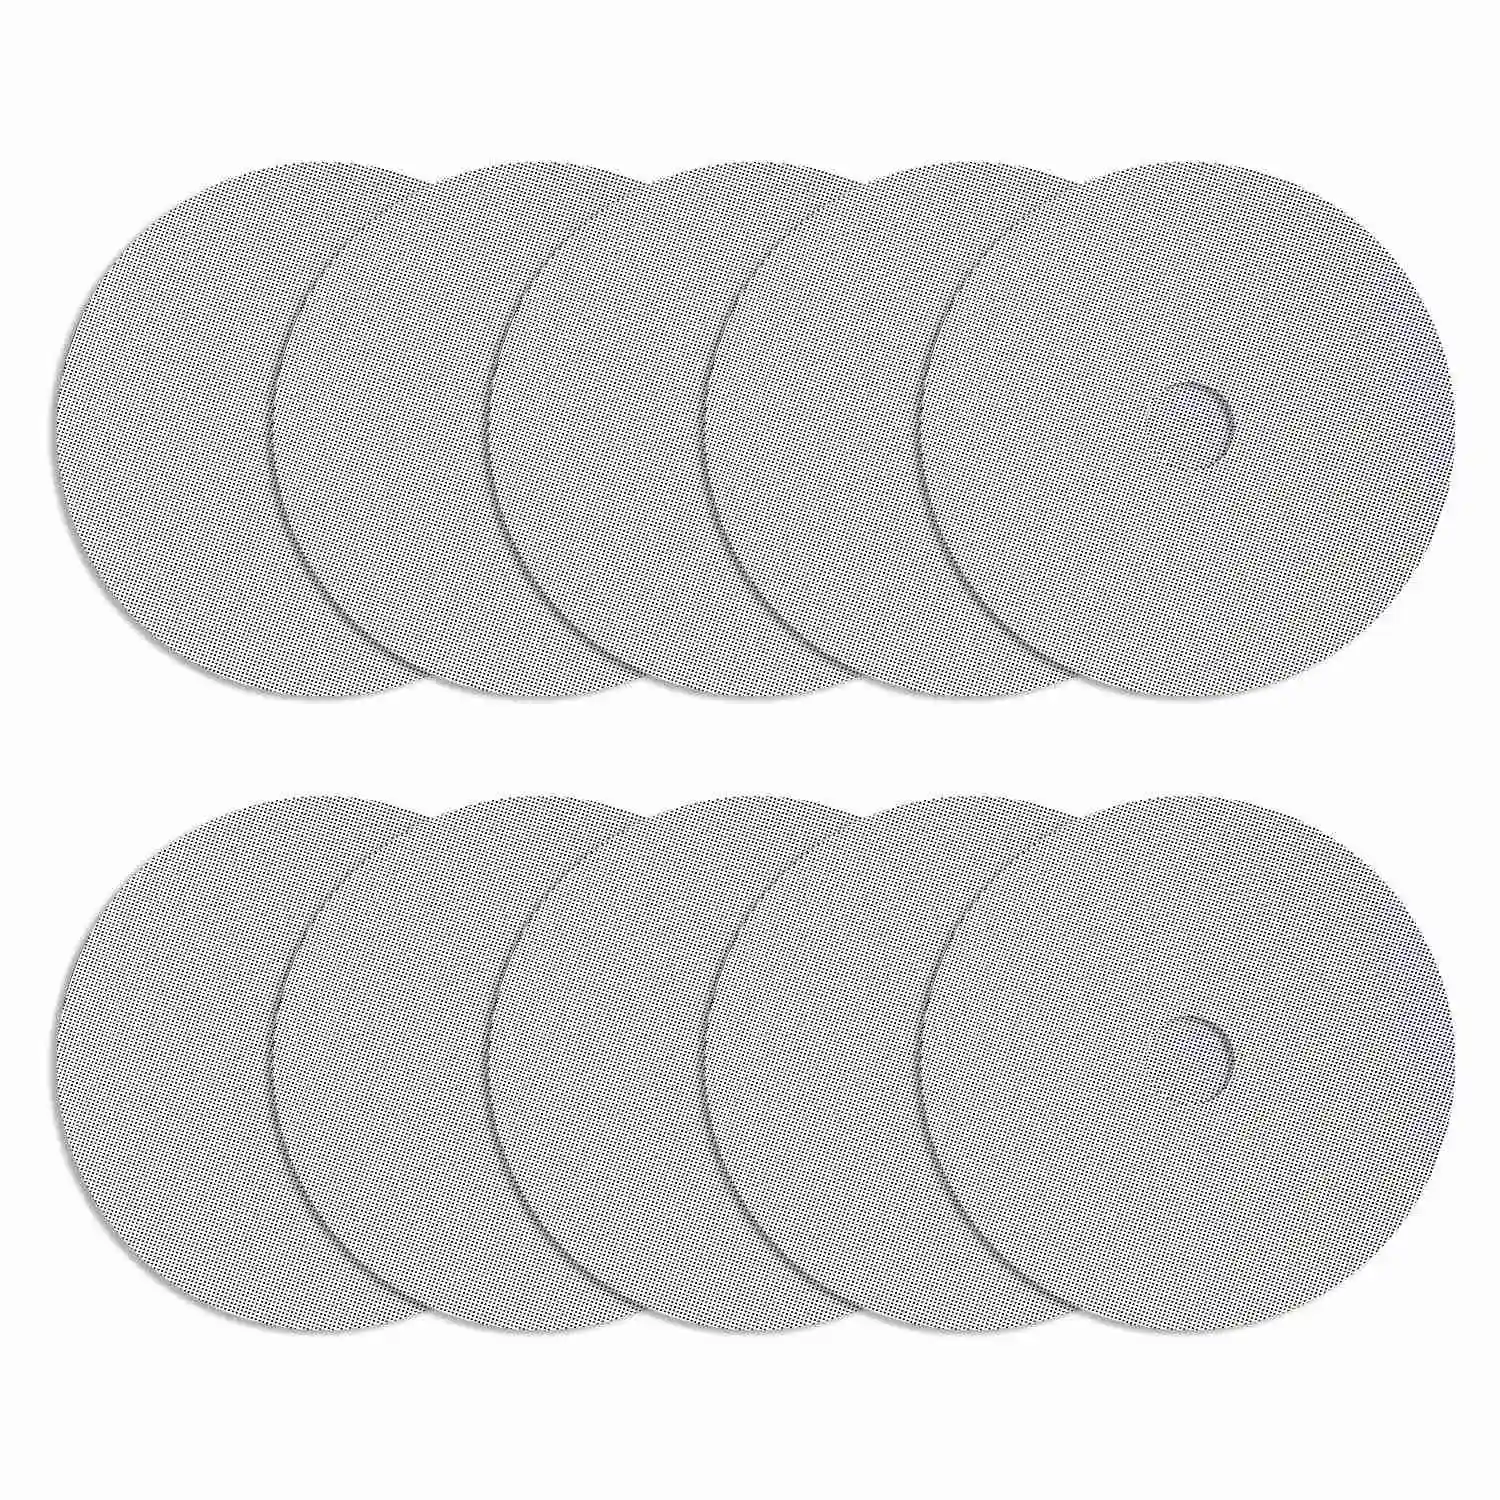 

Round Silicone Dehydrator Sheet Non-Stick Food Dehydrator Pad Reusable Silicone Steamer Grid Baking Pad for Fruit Dryer